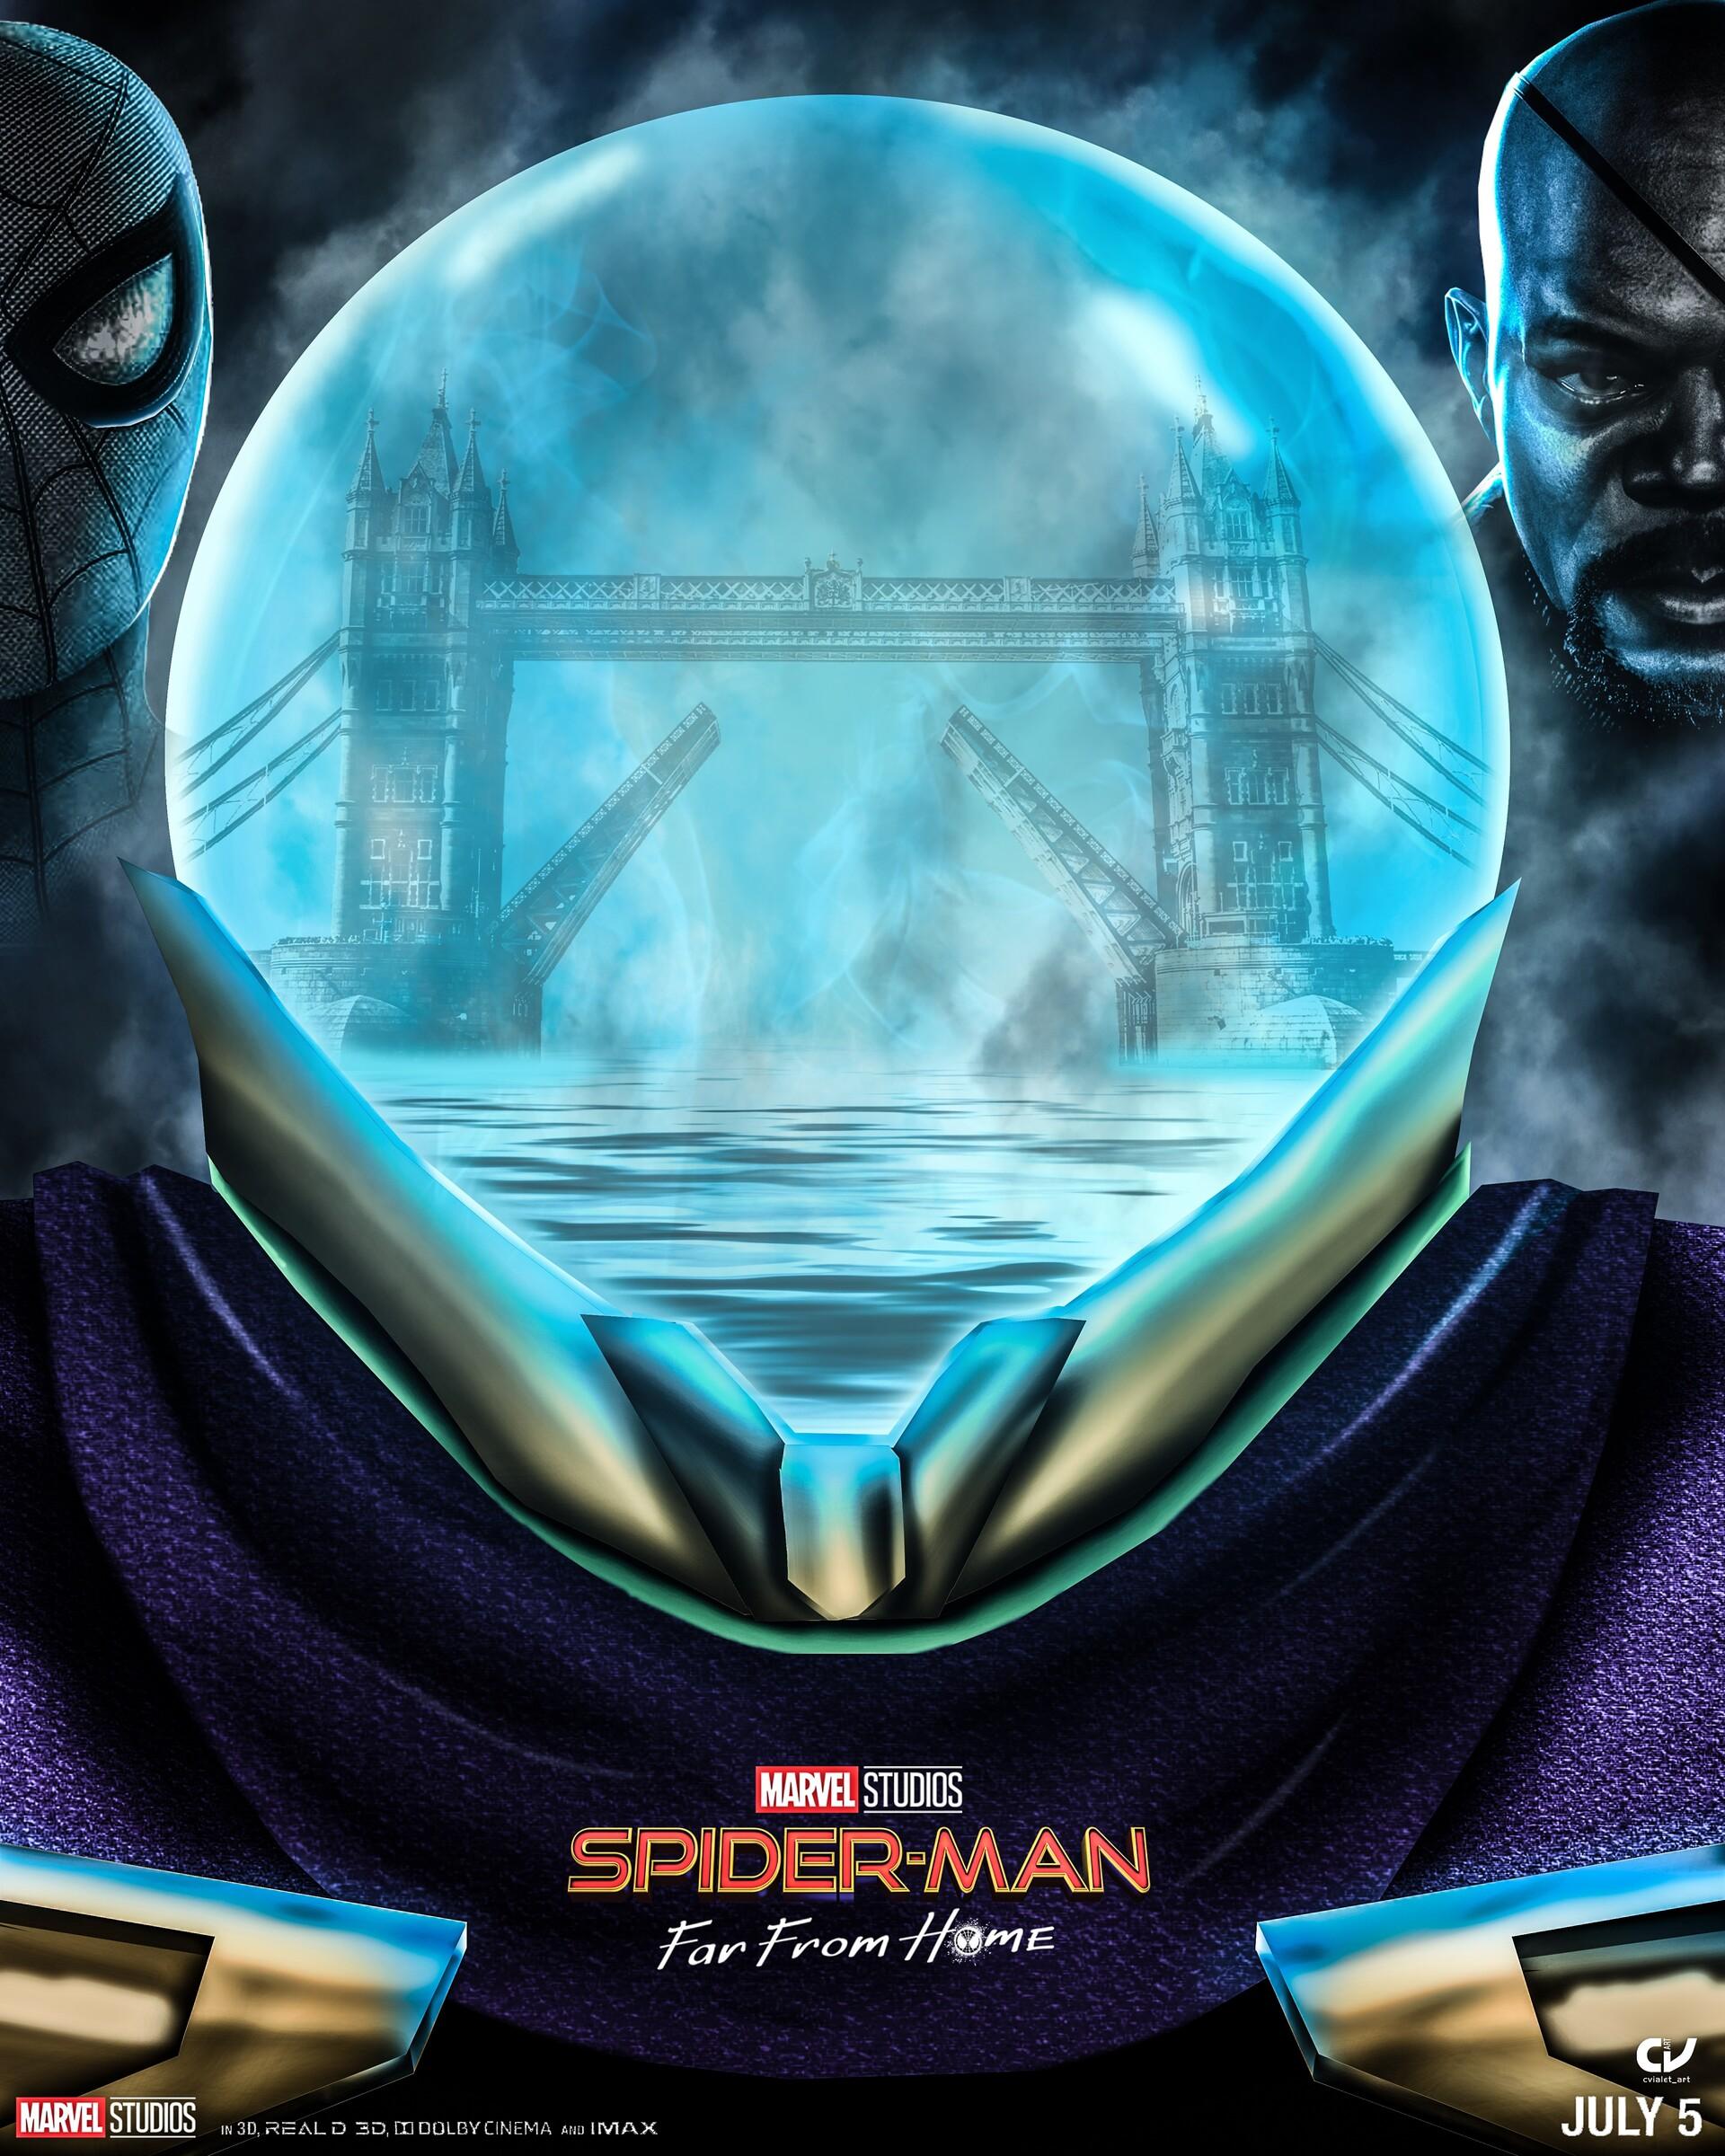 Spiderman Far From Home Poster, Camille Vialet